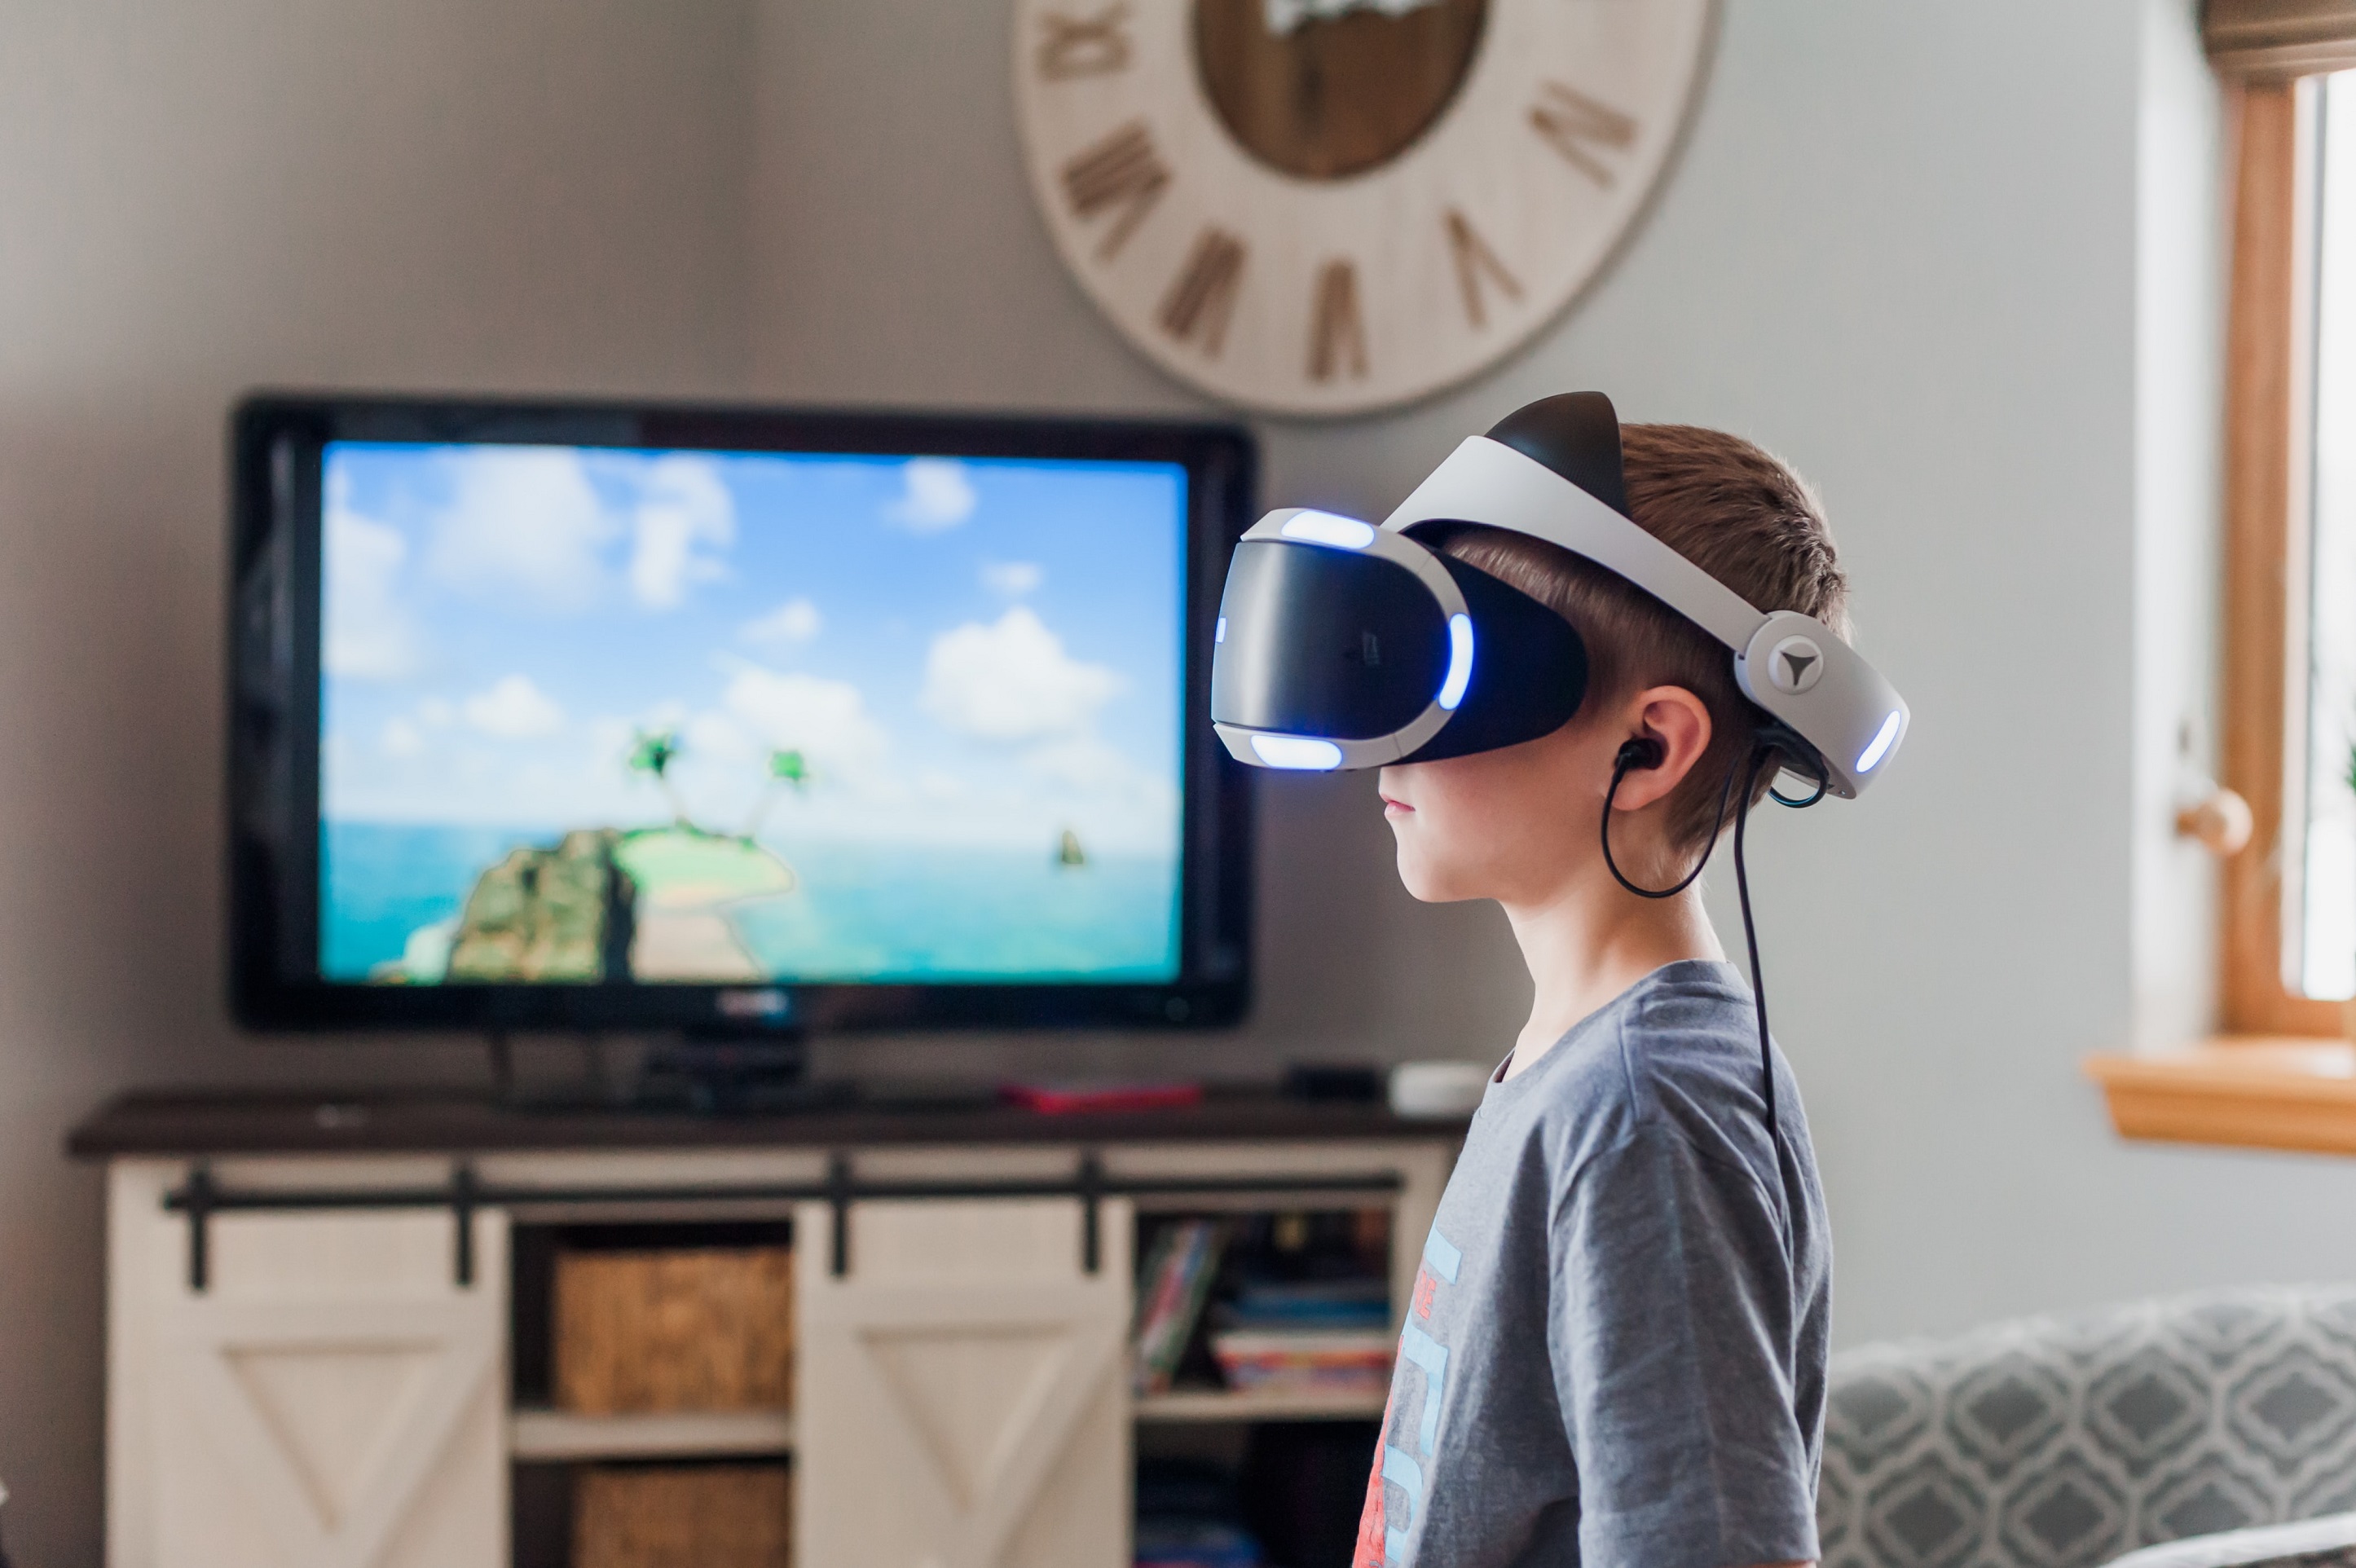 To reach young people, broadcasters will have to compete with game platforms like Roblox, Fortnite and Minecraft – seen as precursors of the metaverse – which already occupy a dominant position.  — Photography Jessica Lewis / Unsplash